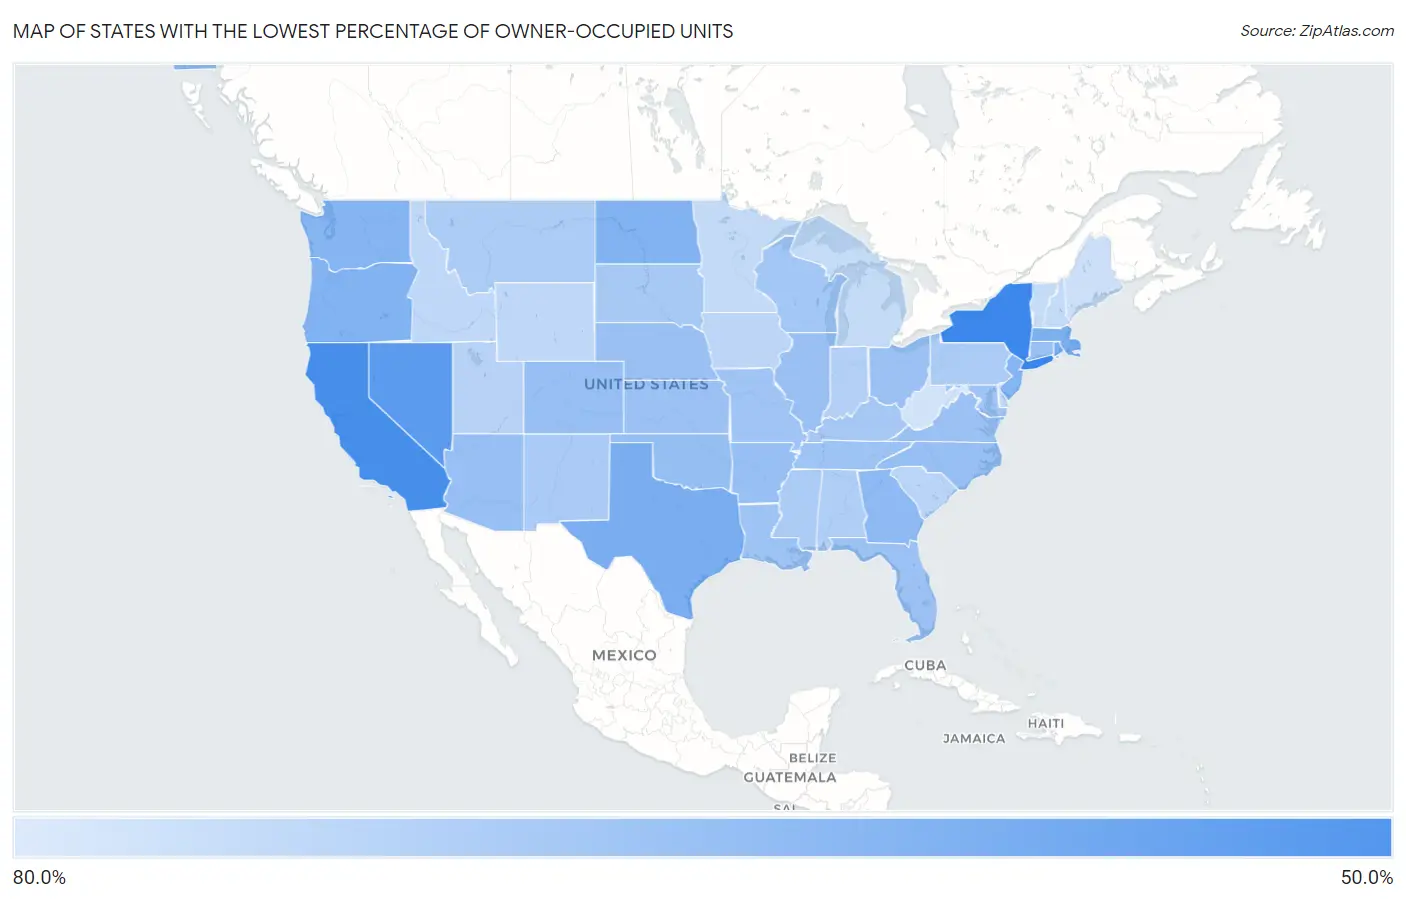 States with the Lowest Percentage of Owner-Occupied Units in the United States Map